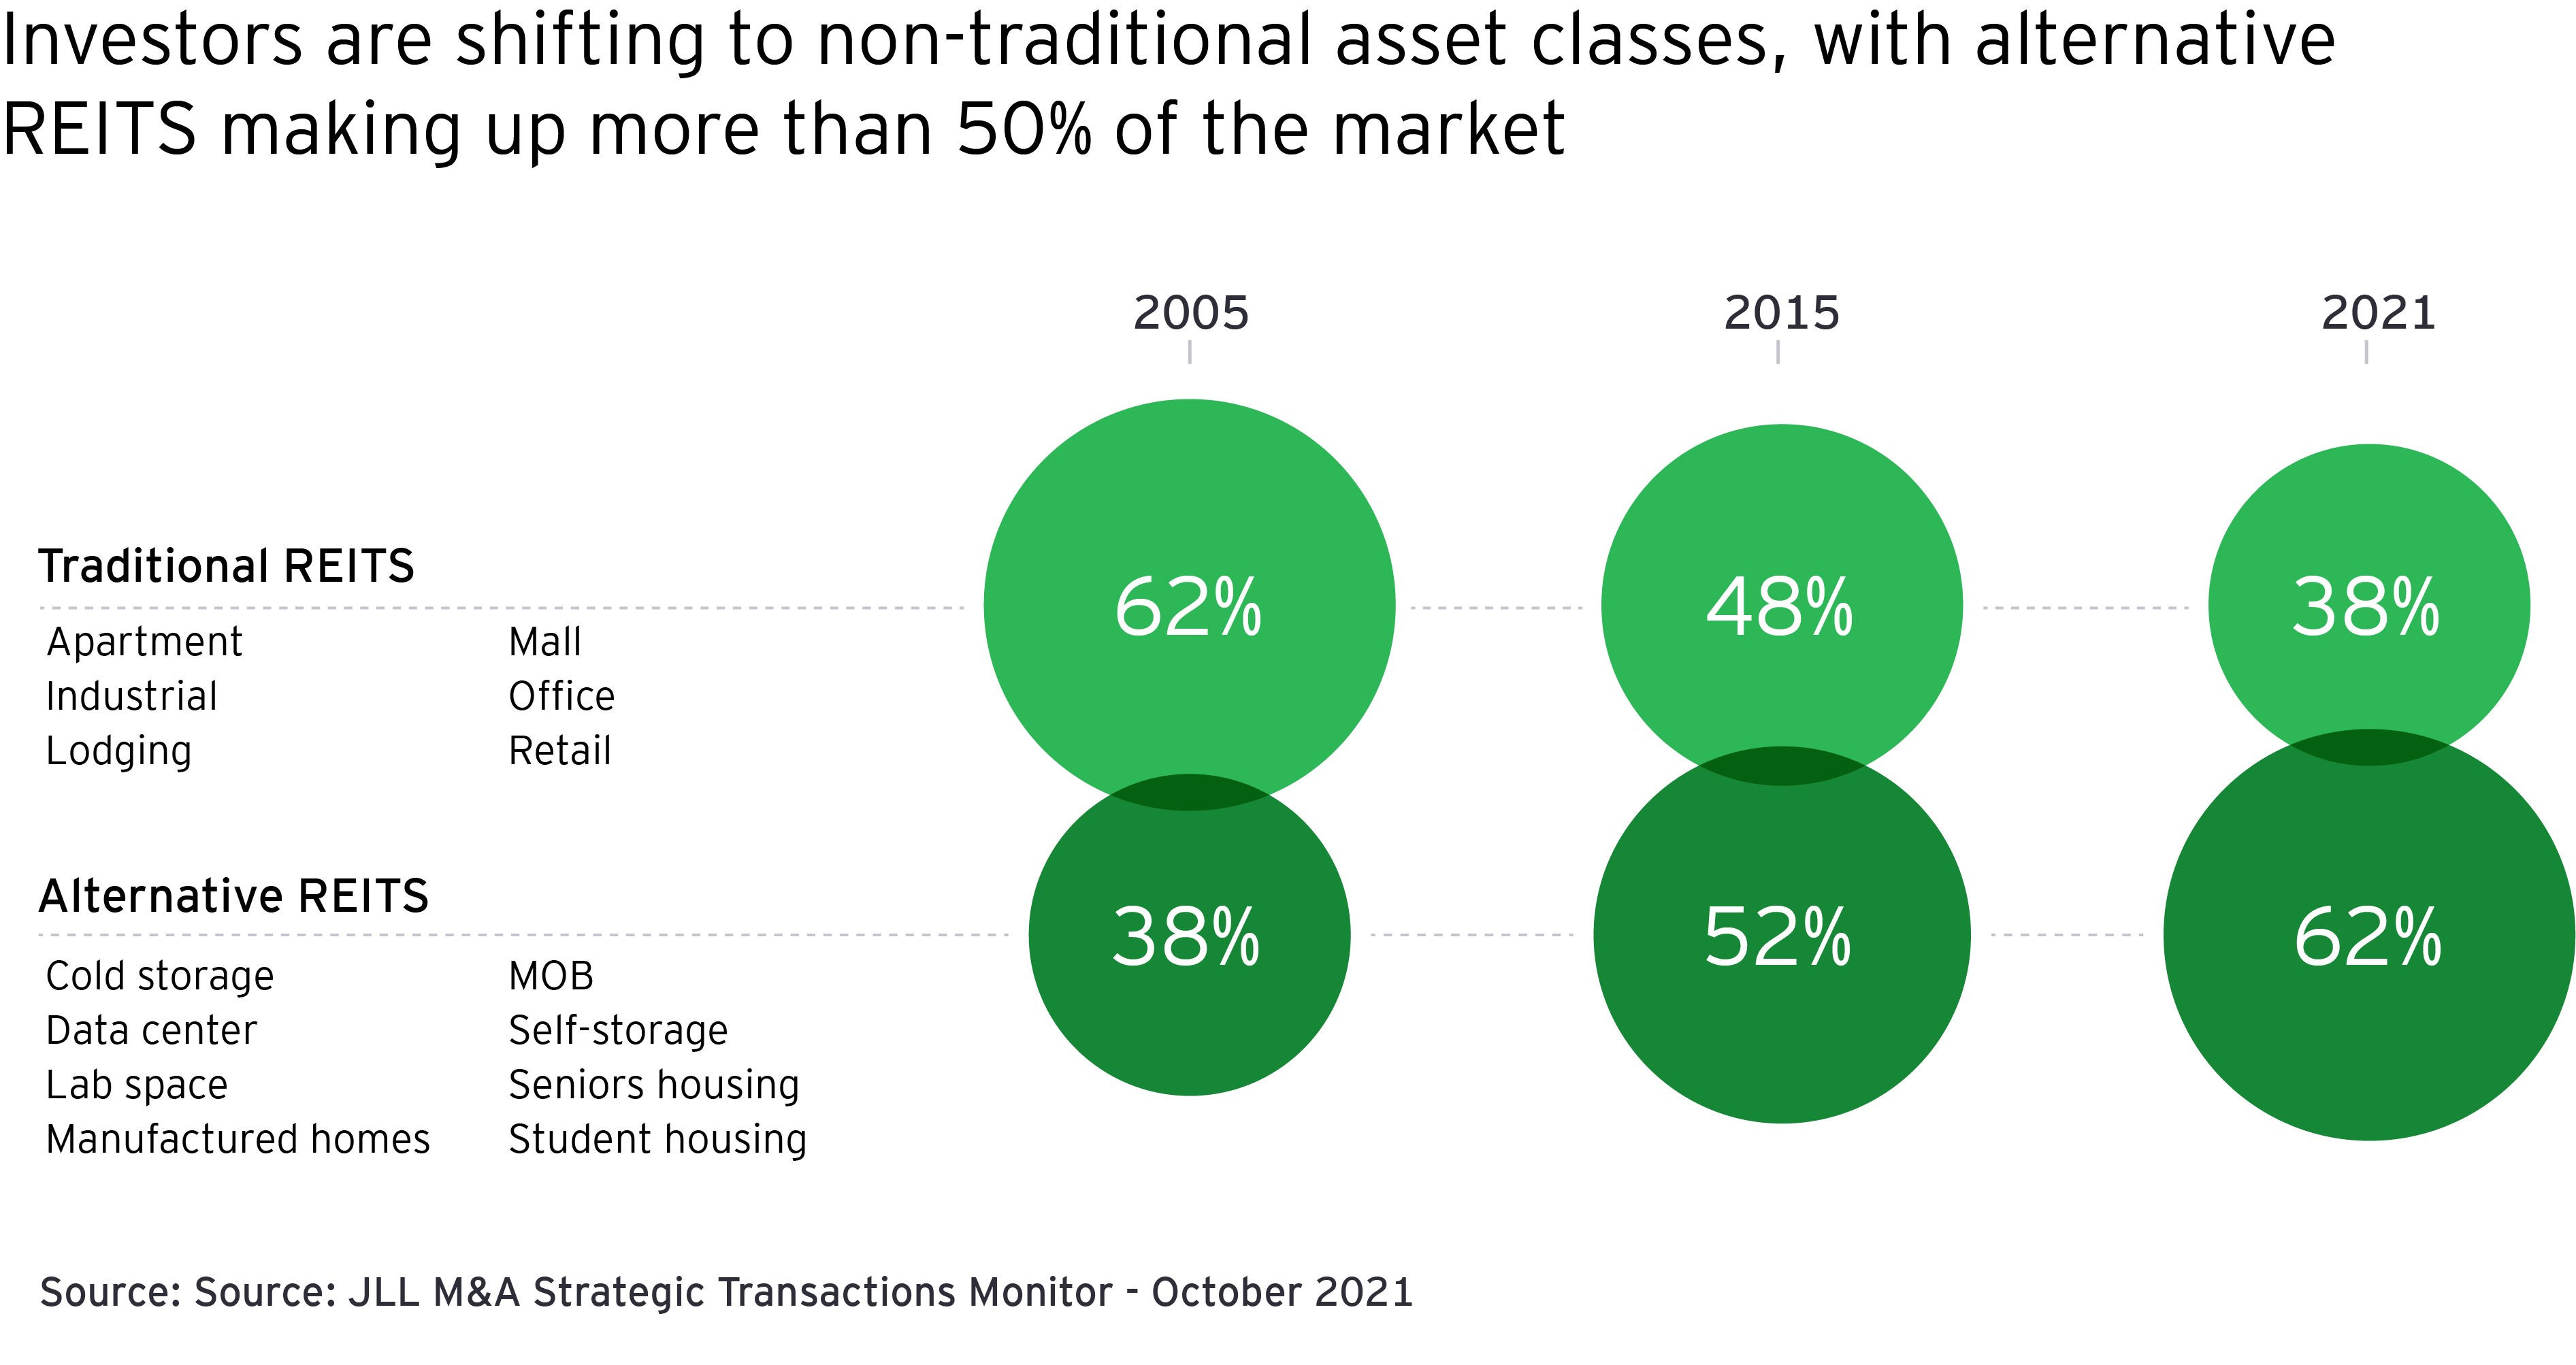 Investors are shifting to non-traditional asset classes, with alternative REITS making up more than 50% of the market